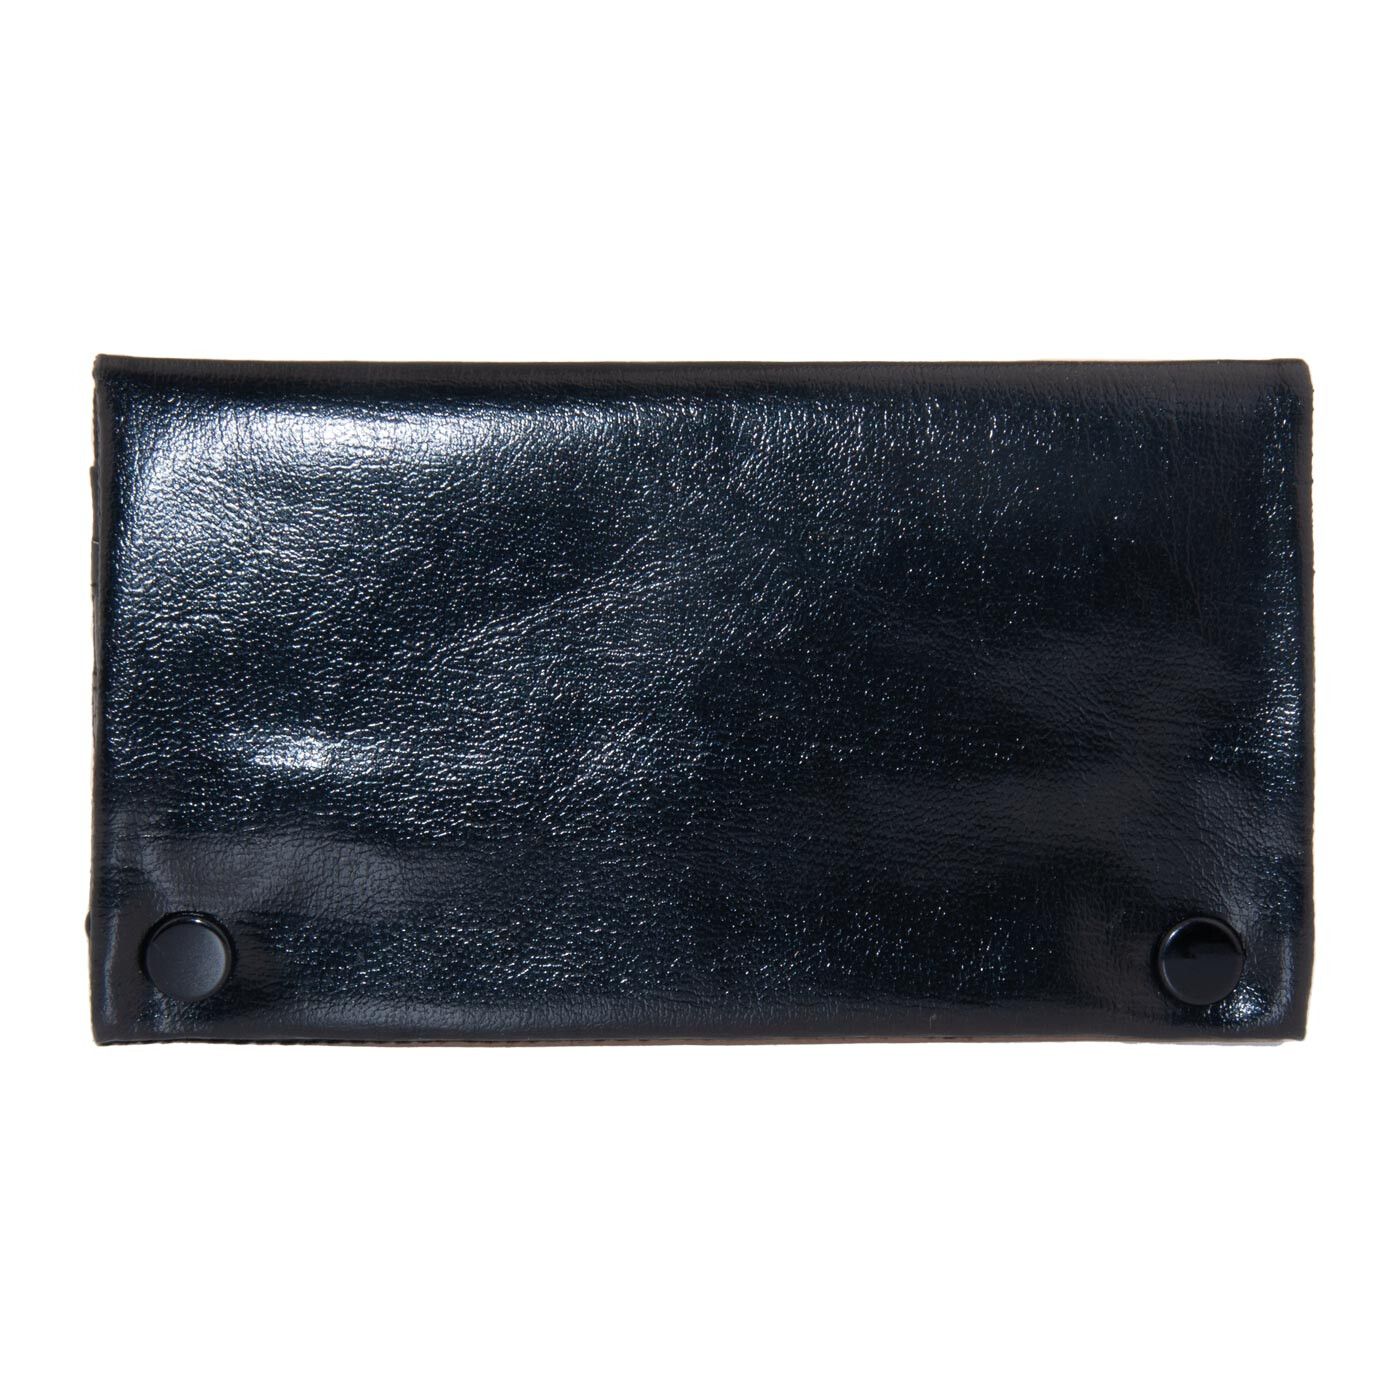 Leather Look Tobacco Pouch 2 Zippers Black